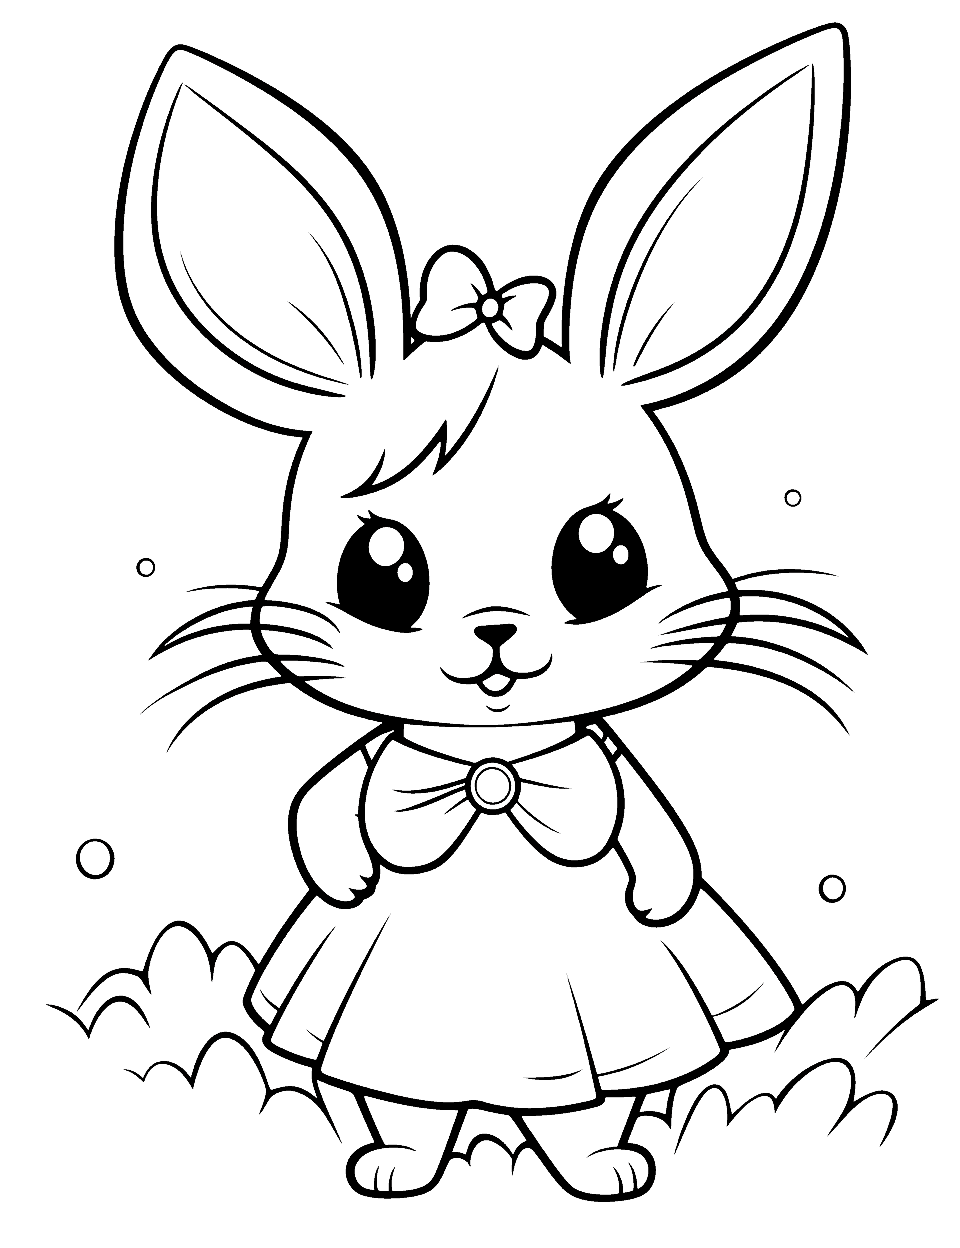 Bunny Girl in a Dress Coloring Page - A female bunny adorned in a cute dress looking like she’s off to a party.